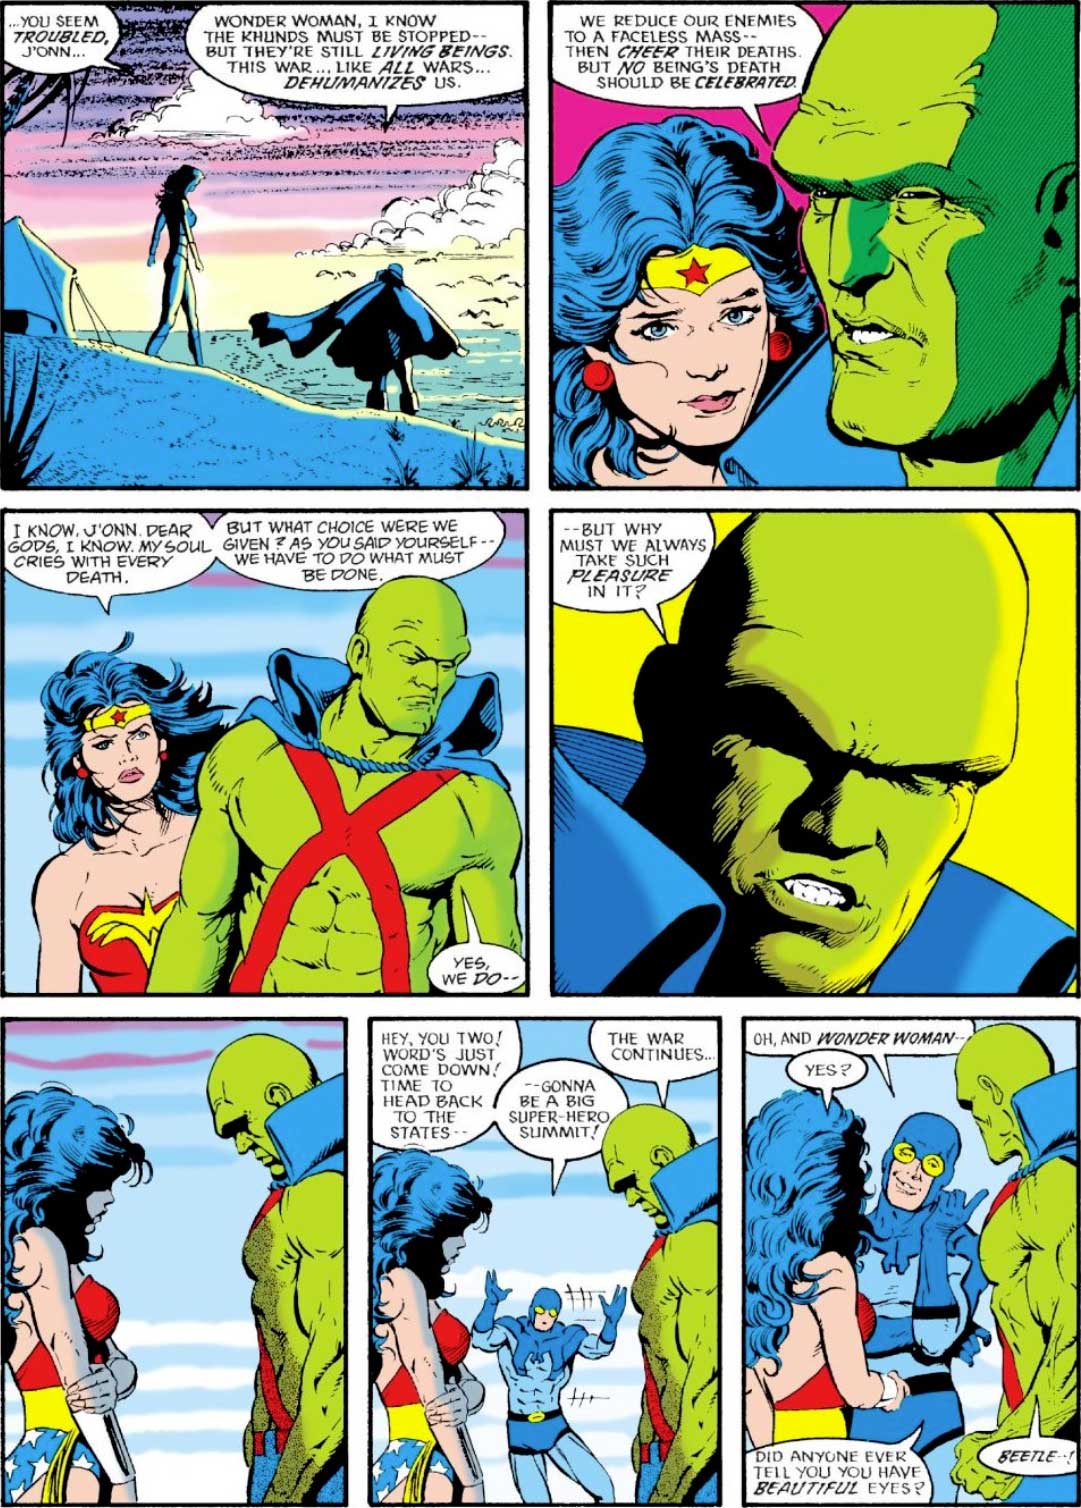 Justice League International #22 by Keith Giffen, JM DeMatteis, Kevin Maguire and Joe Rubinstein